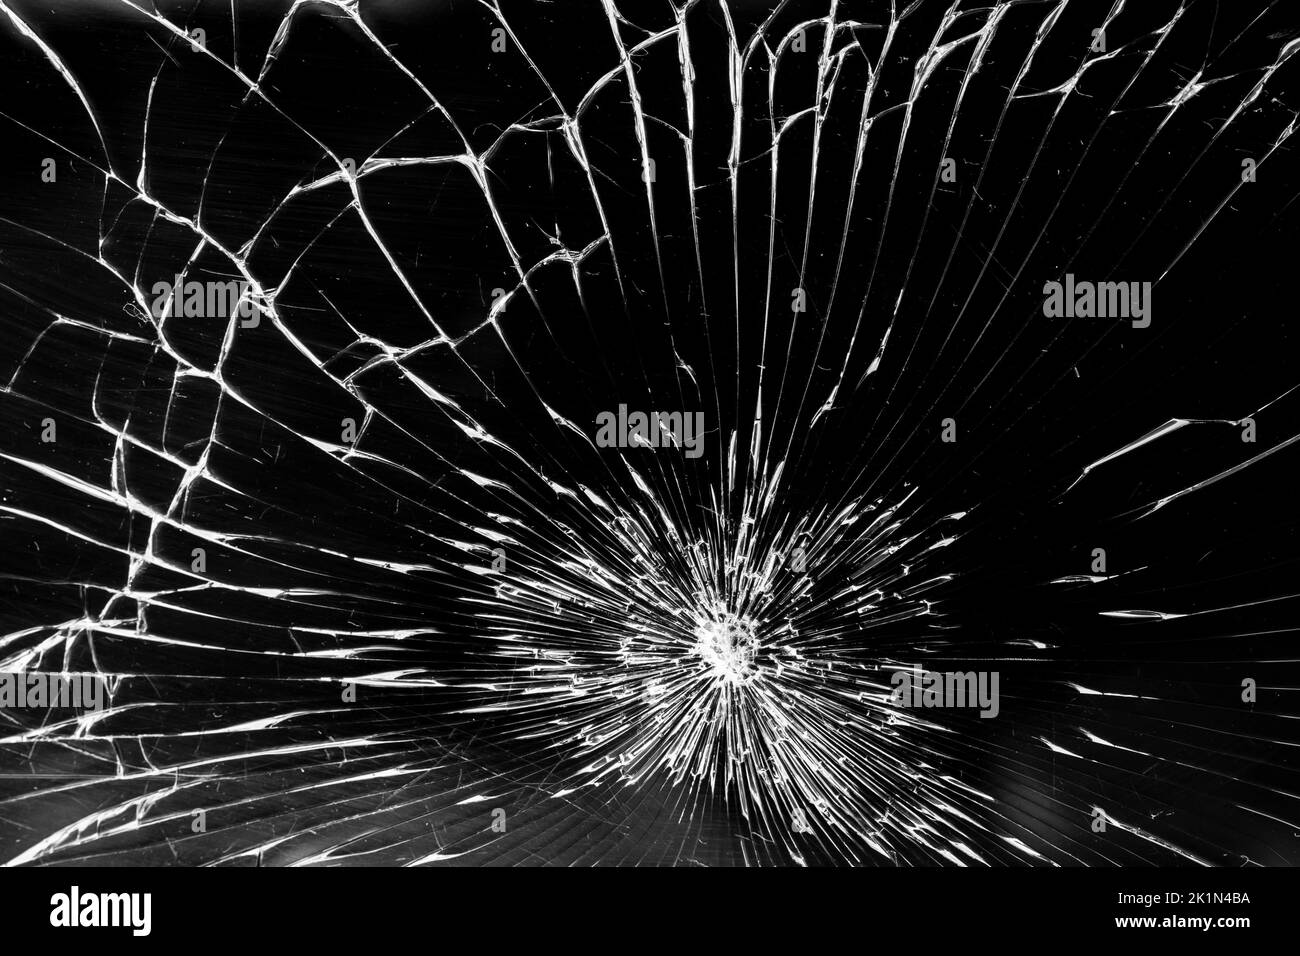 Cracked smart phone screen, abstract pattern with white lines on black background Stock Photo